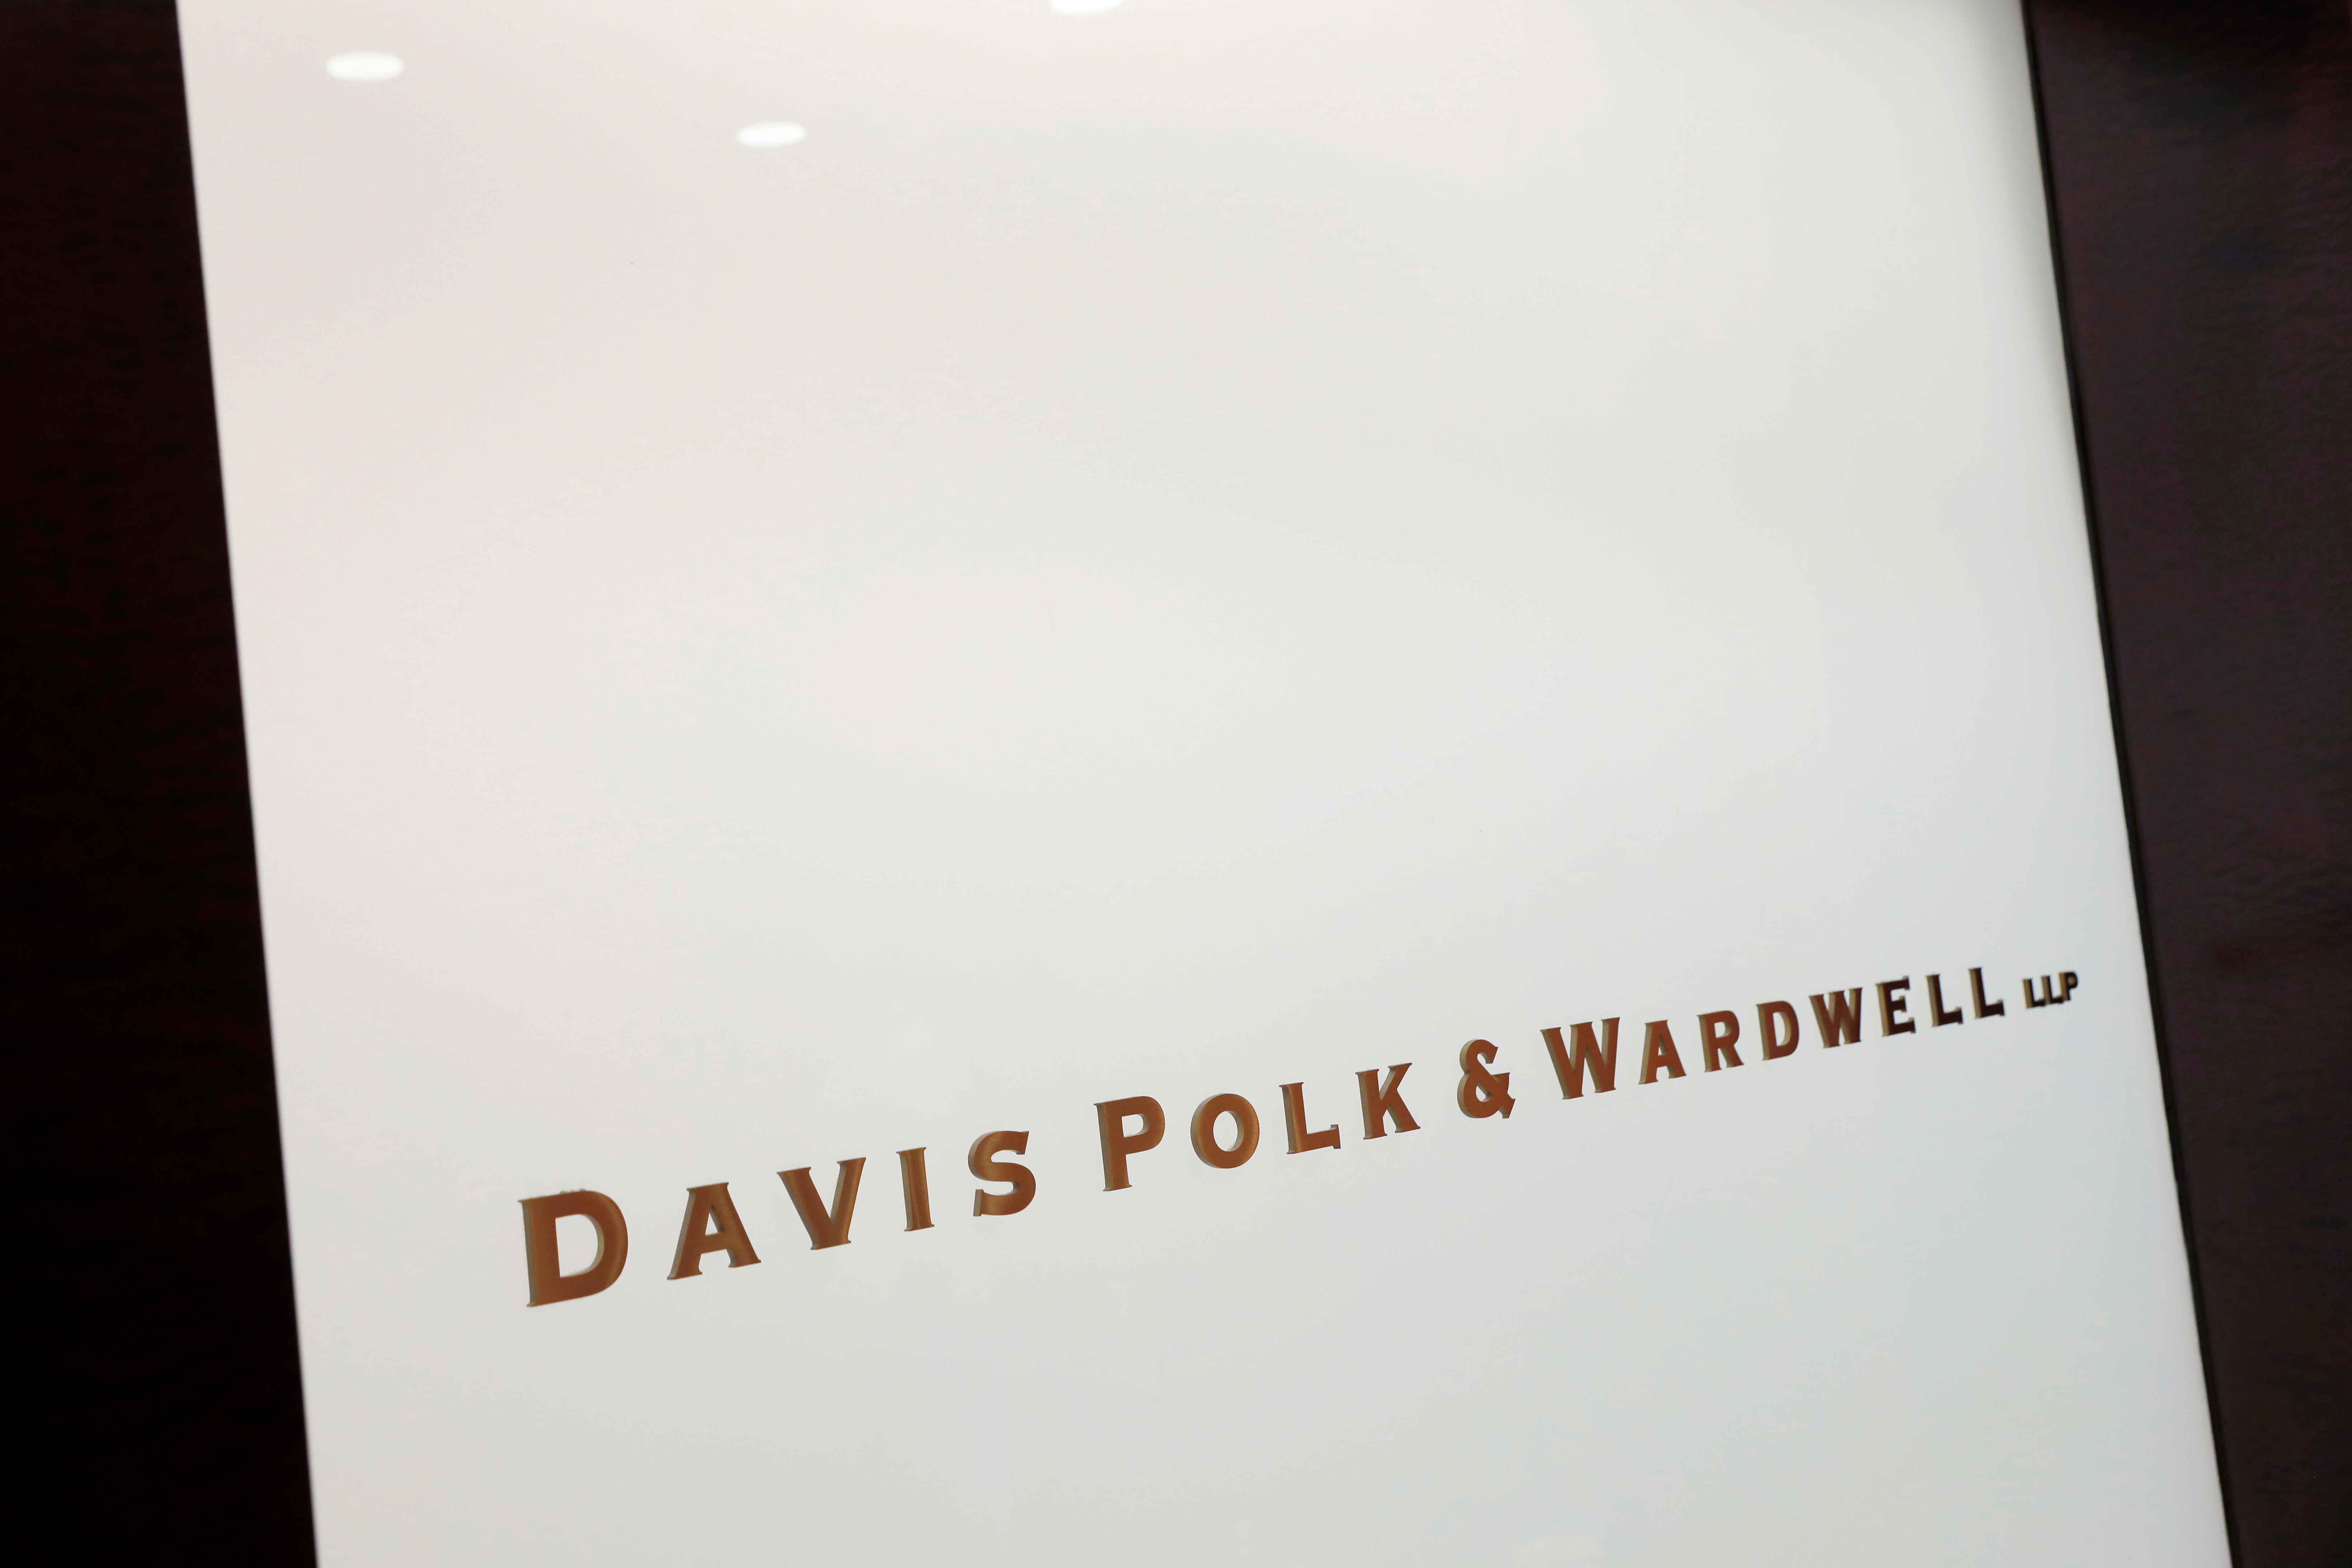 The logo of the law firm Davis Polk & Wardwell is seen in their legal offices in New York City, New York